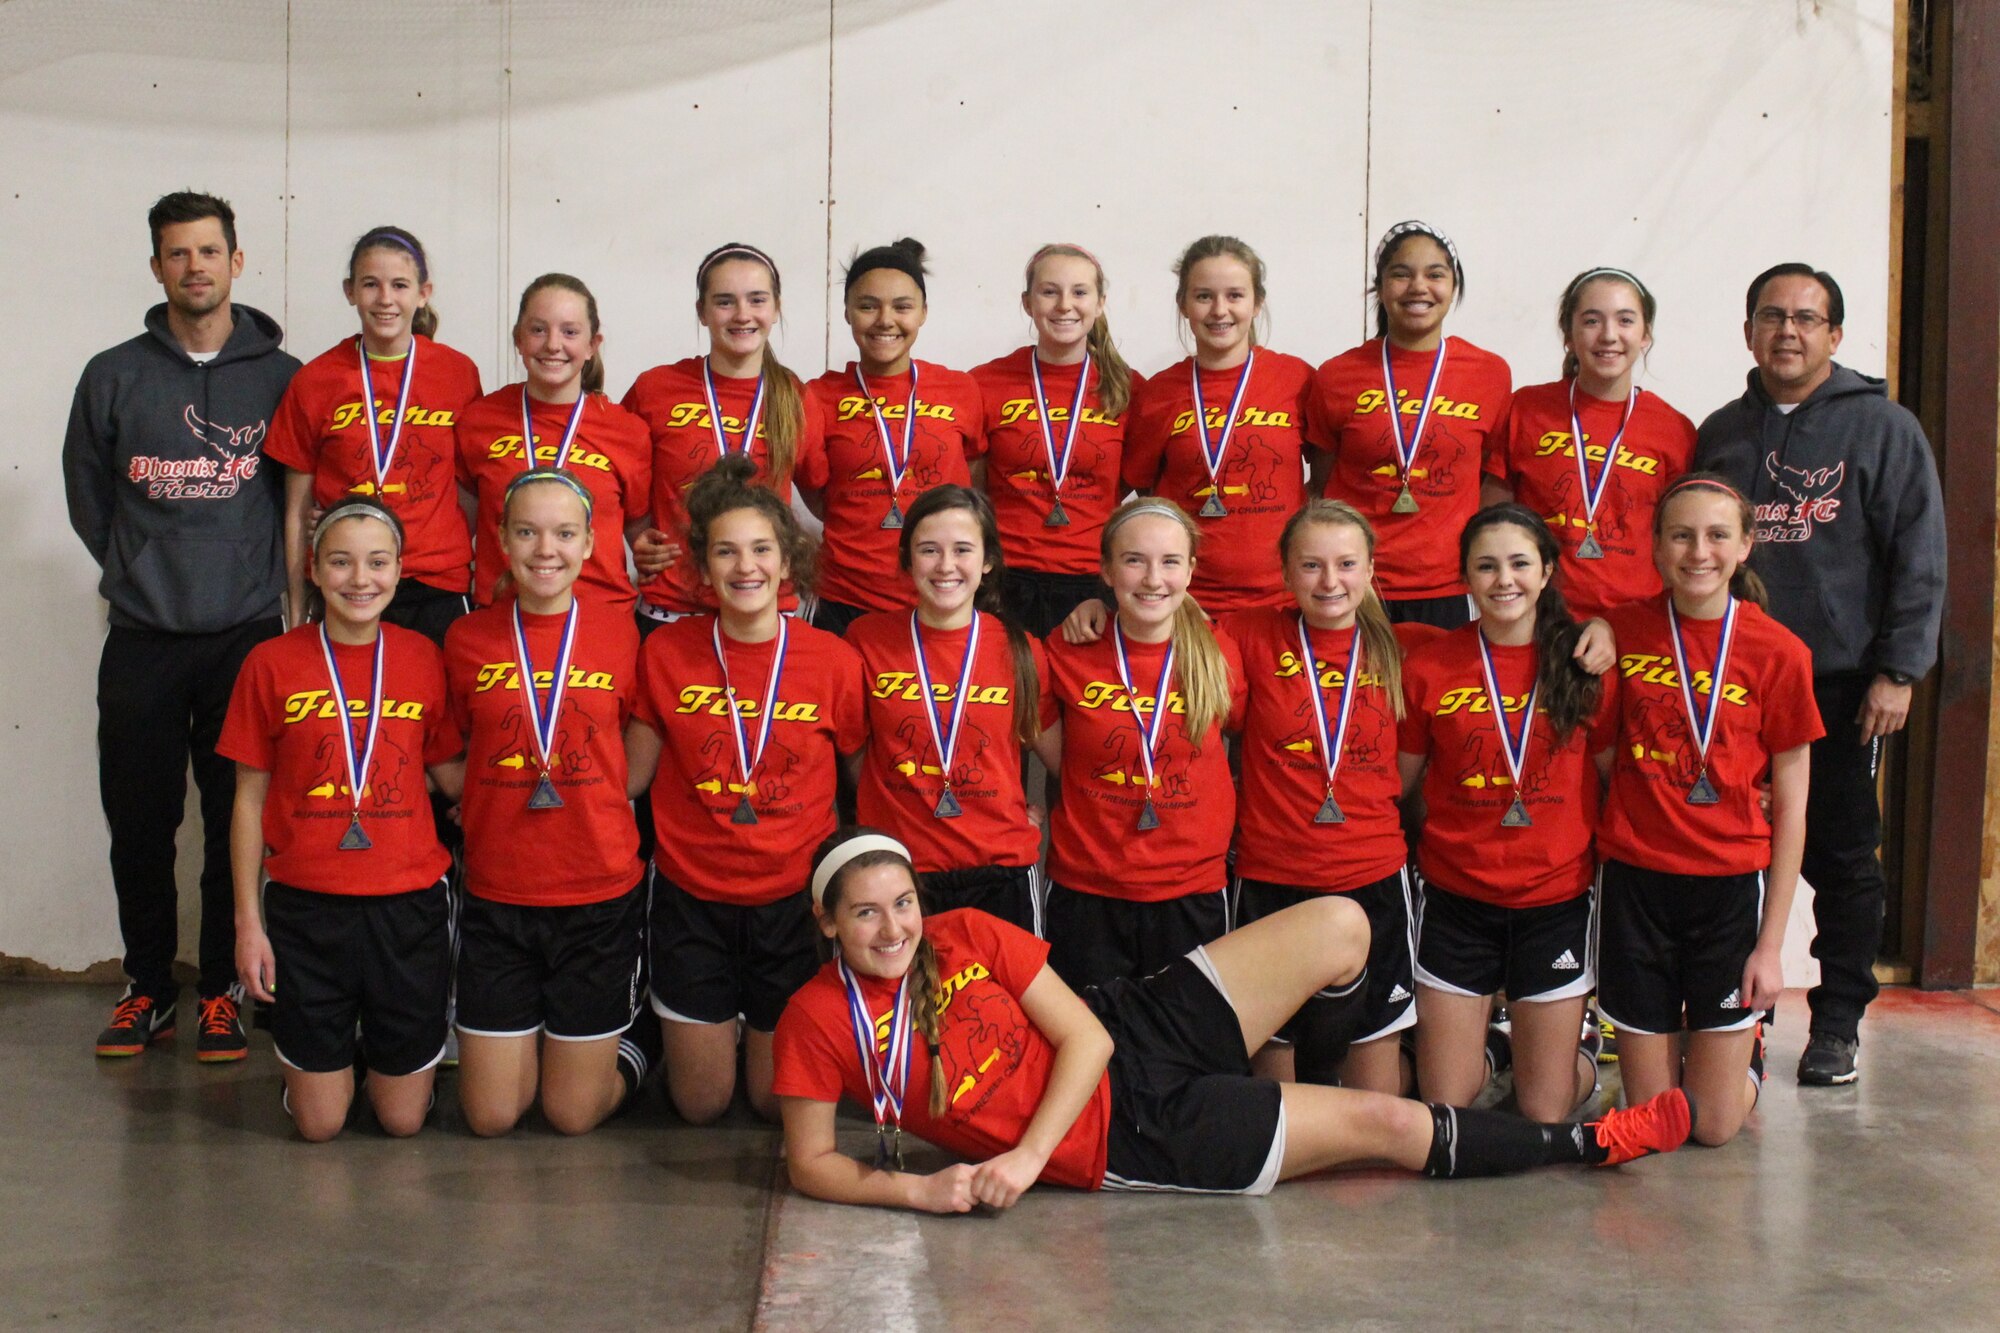 Retired U.S. Air Force Master Sgt. Richard Esparza, 55th Medical Group medical readiness manager, right, poses for a team photo with his under-15 girls premier team, Fiera, in 2013. The team received medals after winning their respective premier age division’s tournament. (U.S. Air Force courtesy photo)